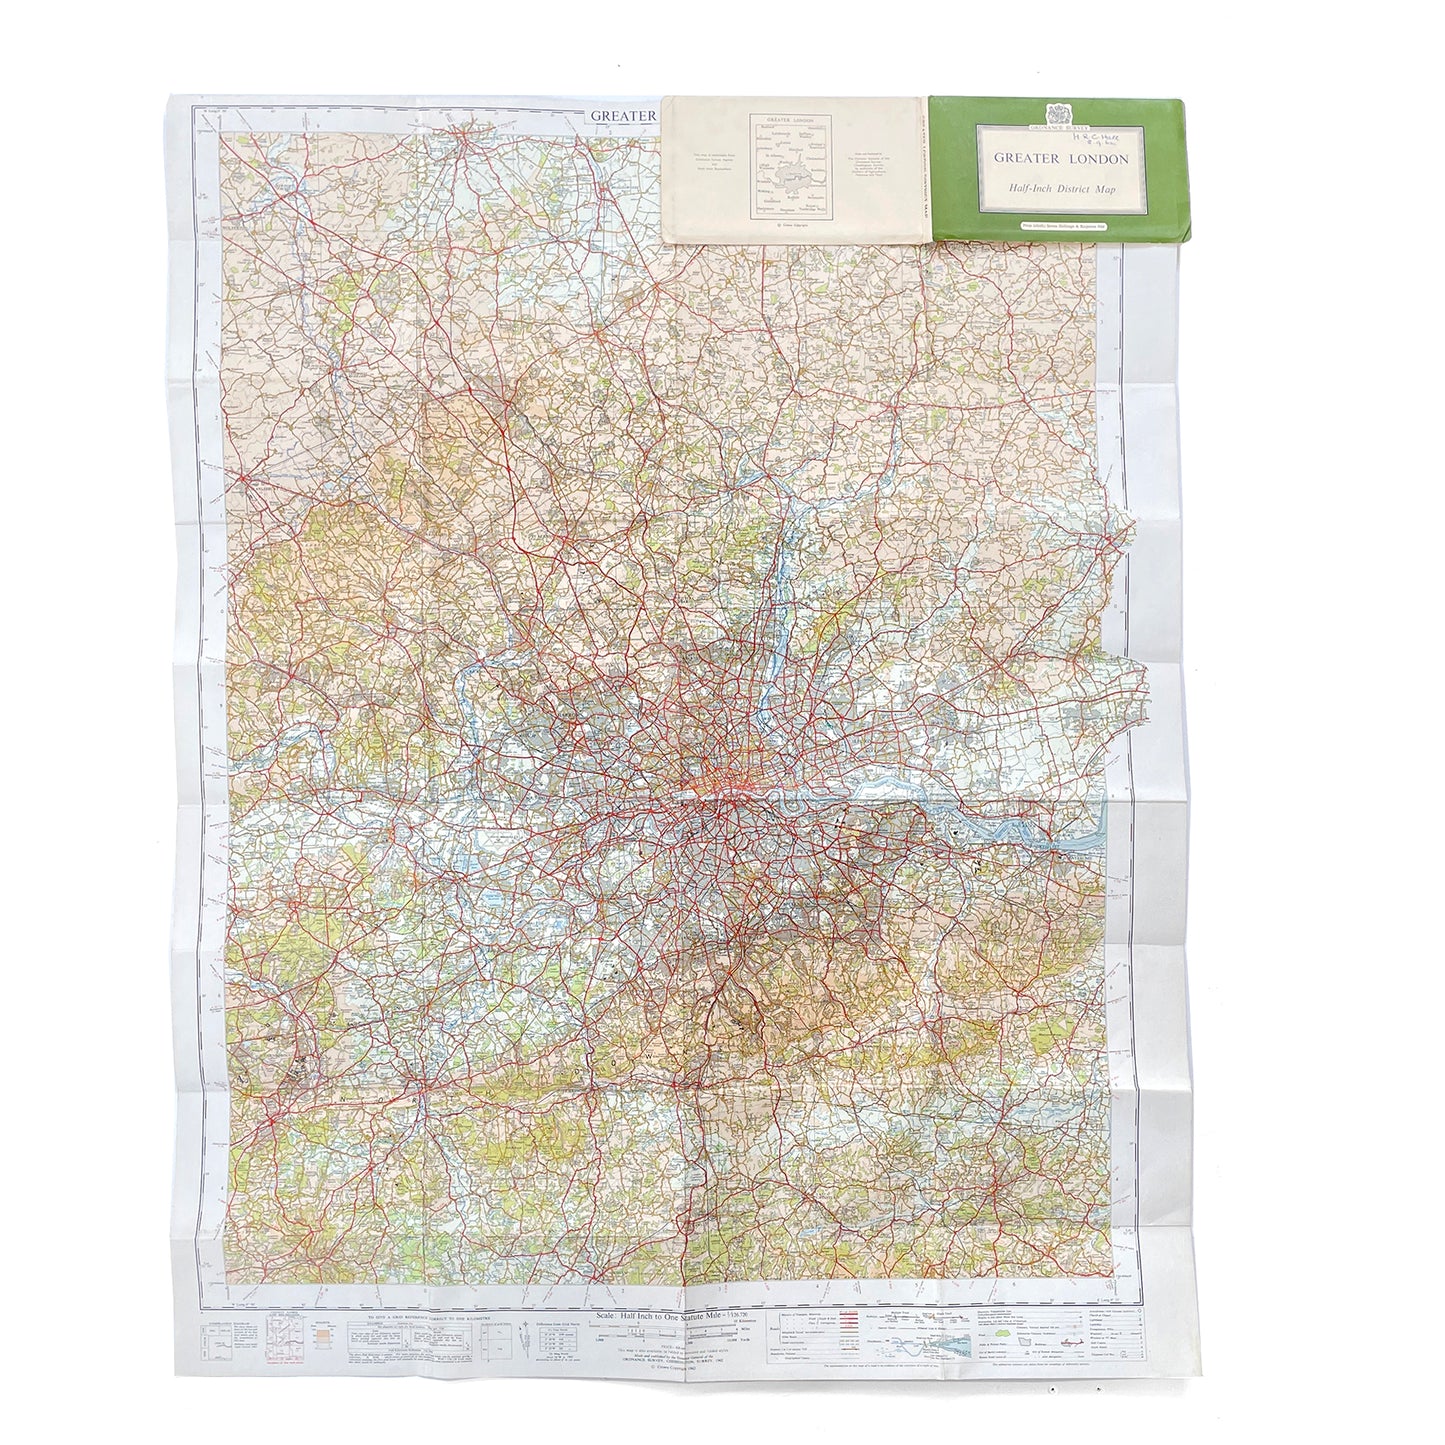 Load image into Gallery viewer, 1962 Ordnance Survey District Map of Greater London - Sukie
